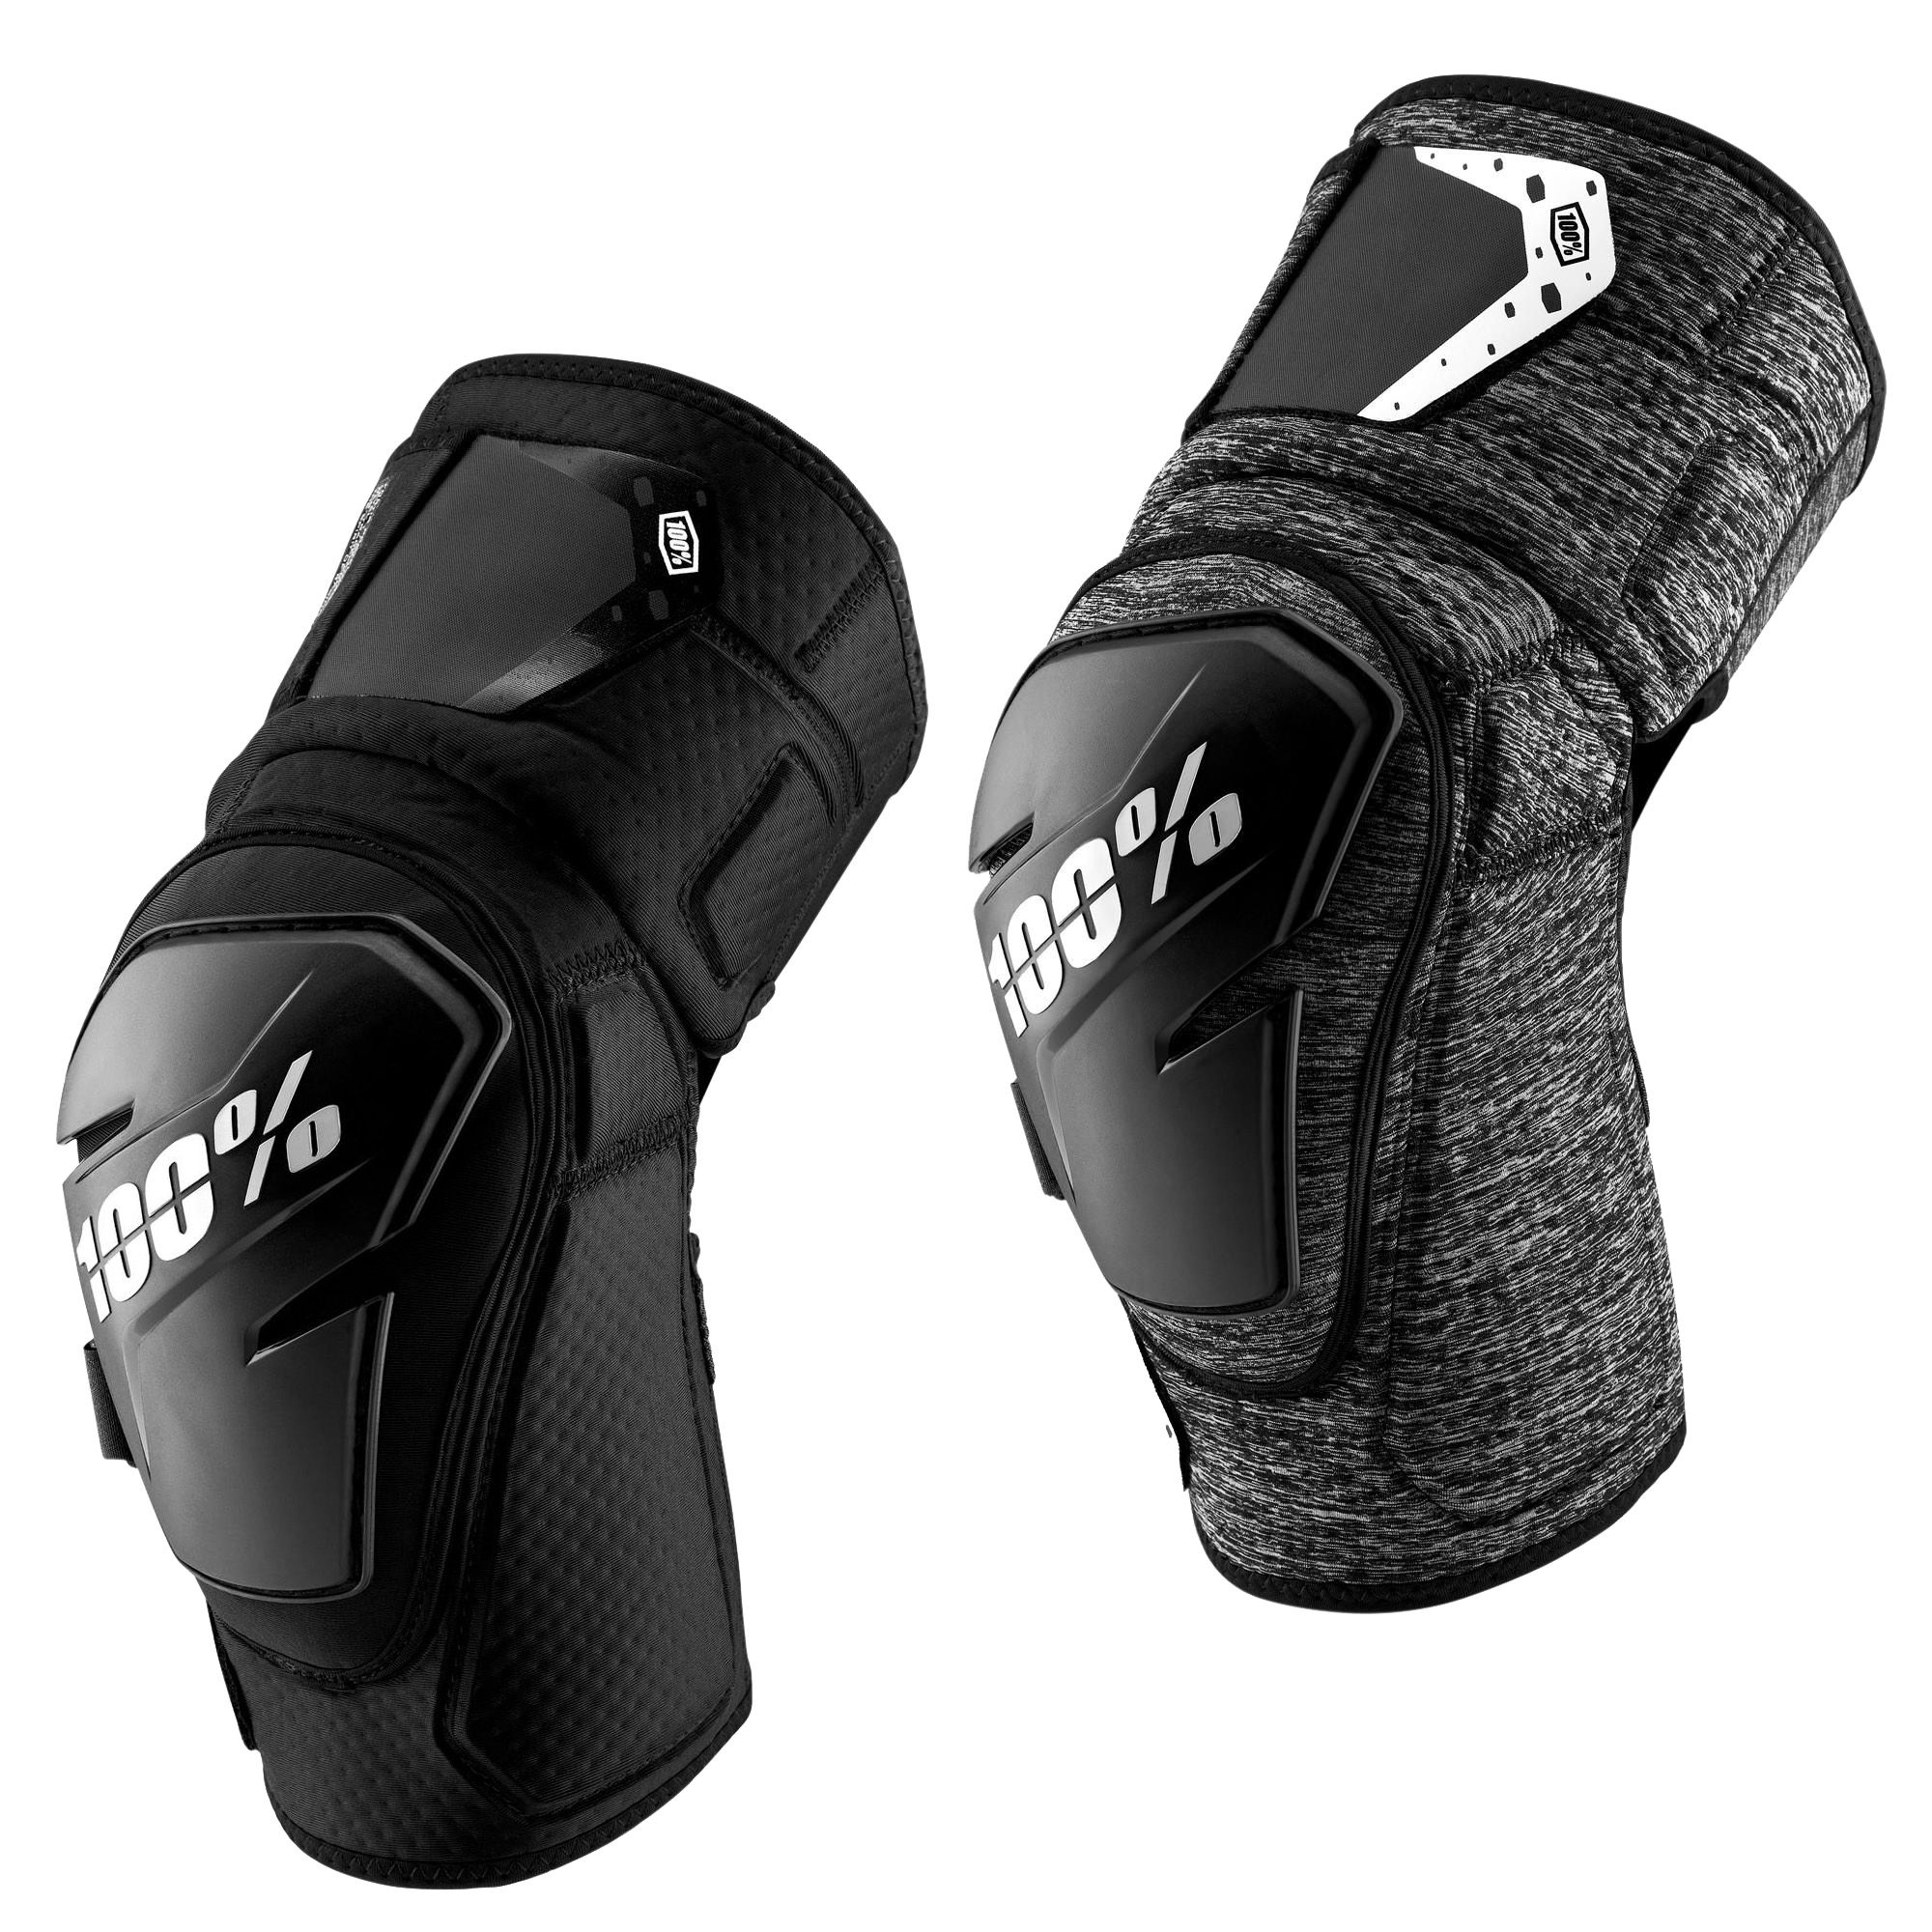 FORTIS 100% Fortis Knee Guards 